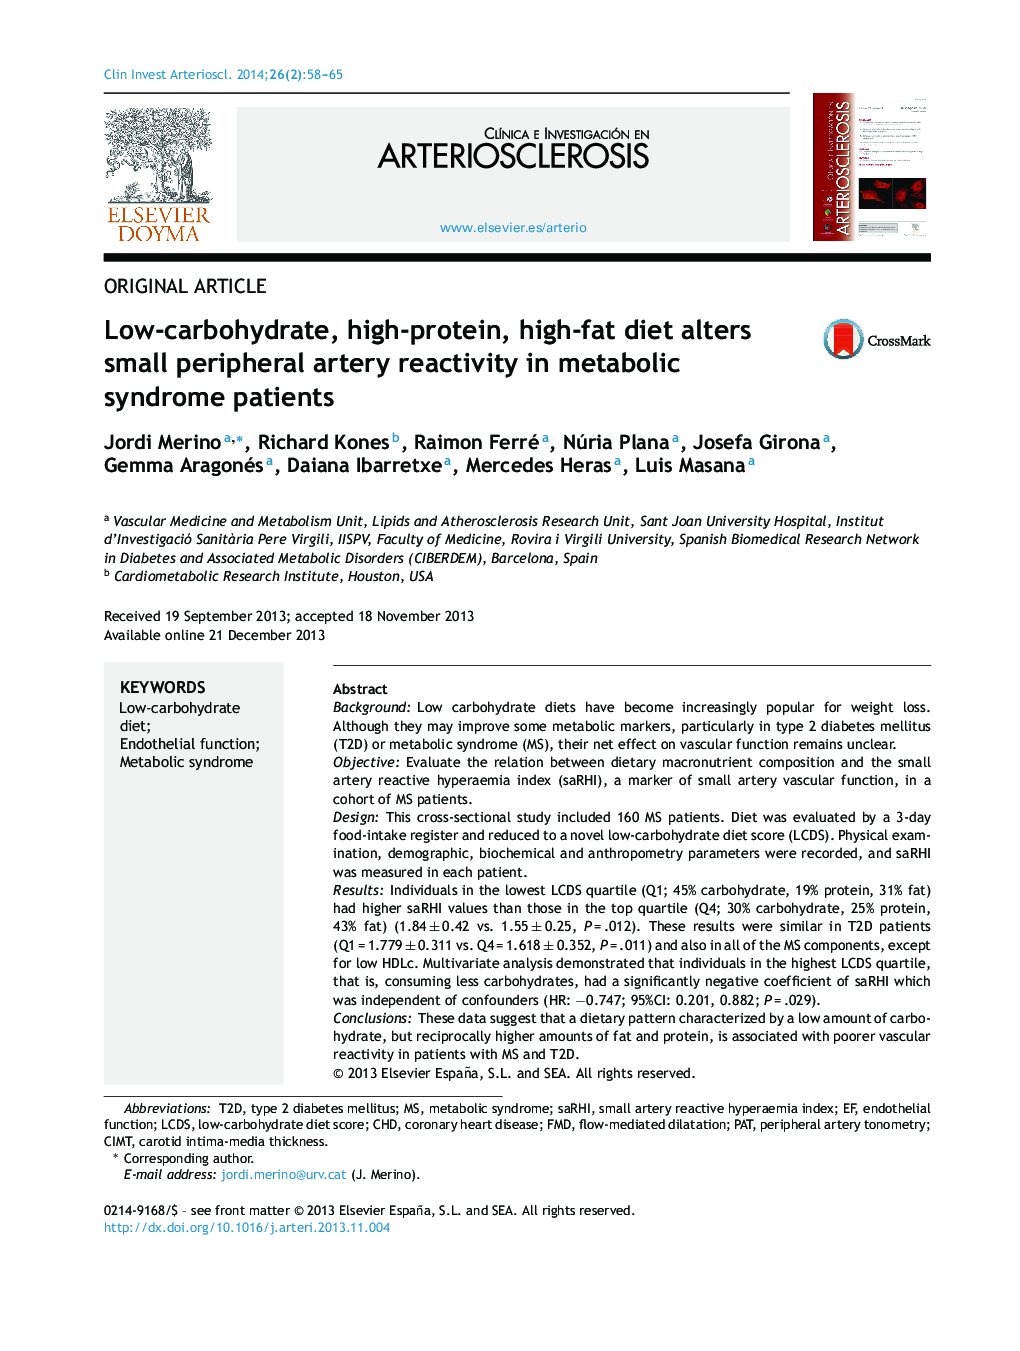 Low-carbohydrate, high-protein, high-fat diet alters small peripheral artery reactivity in metabolic syndrome patients